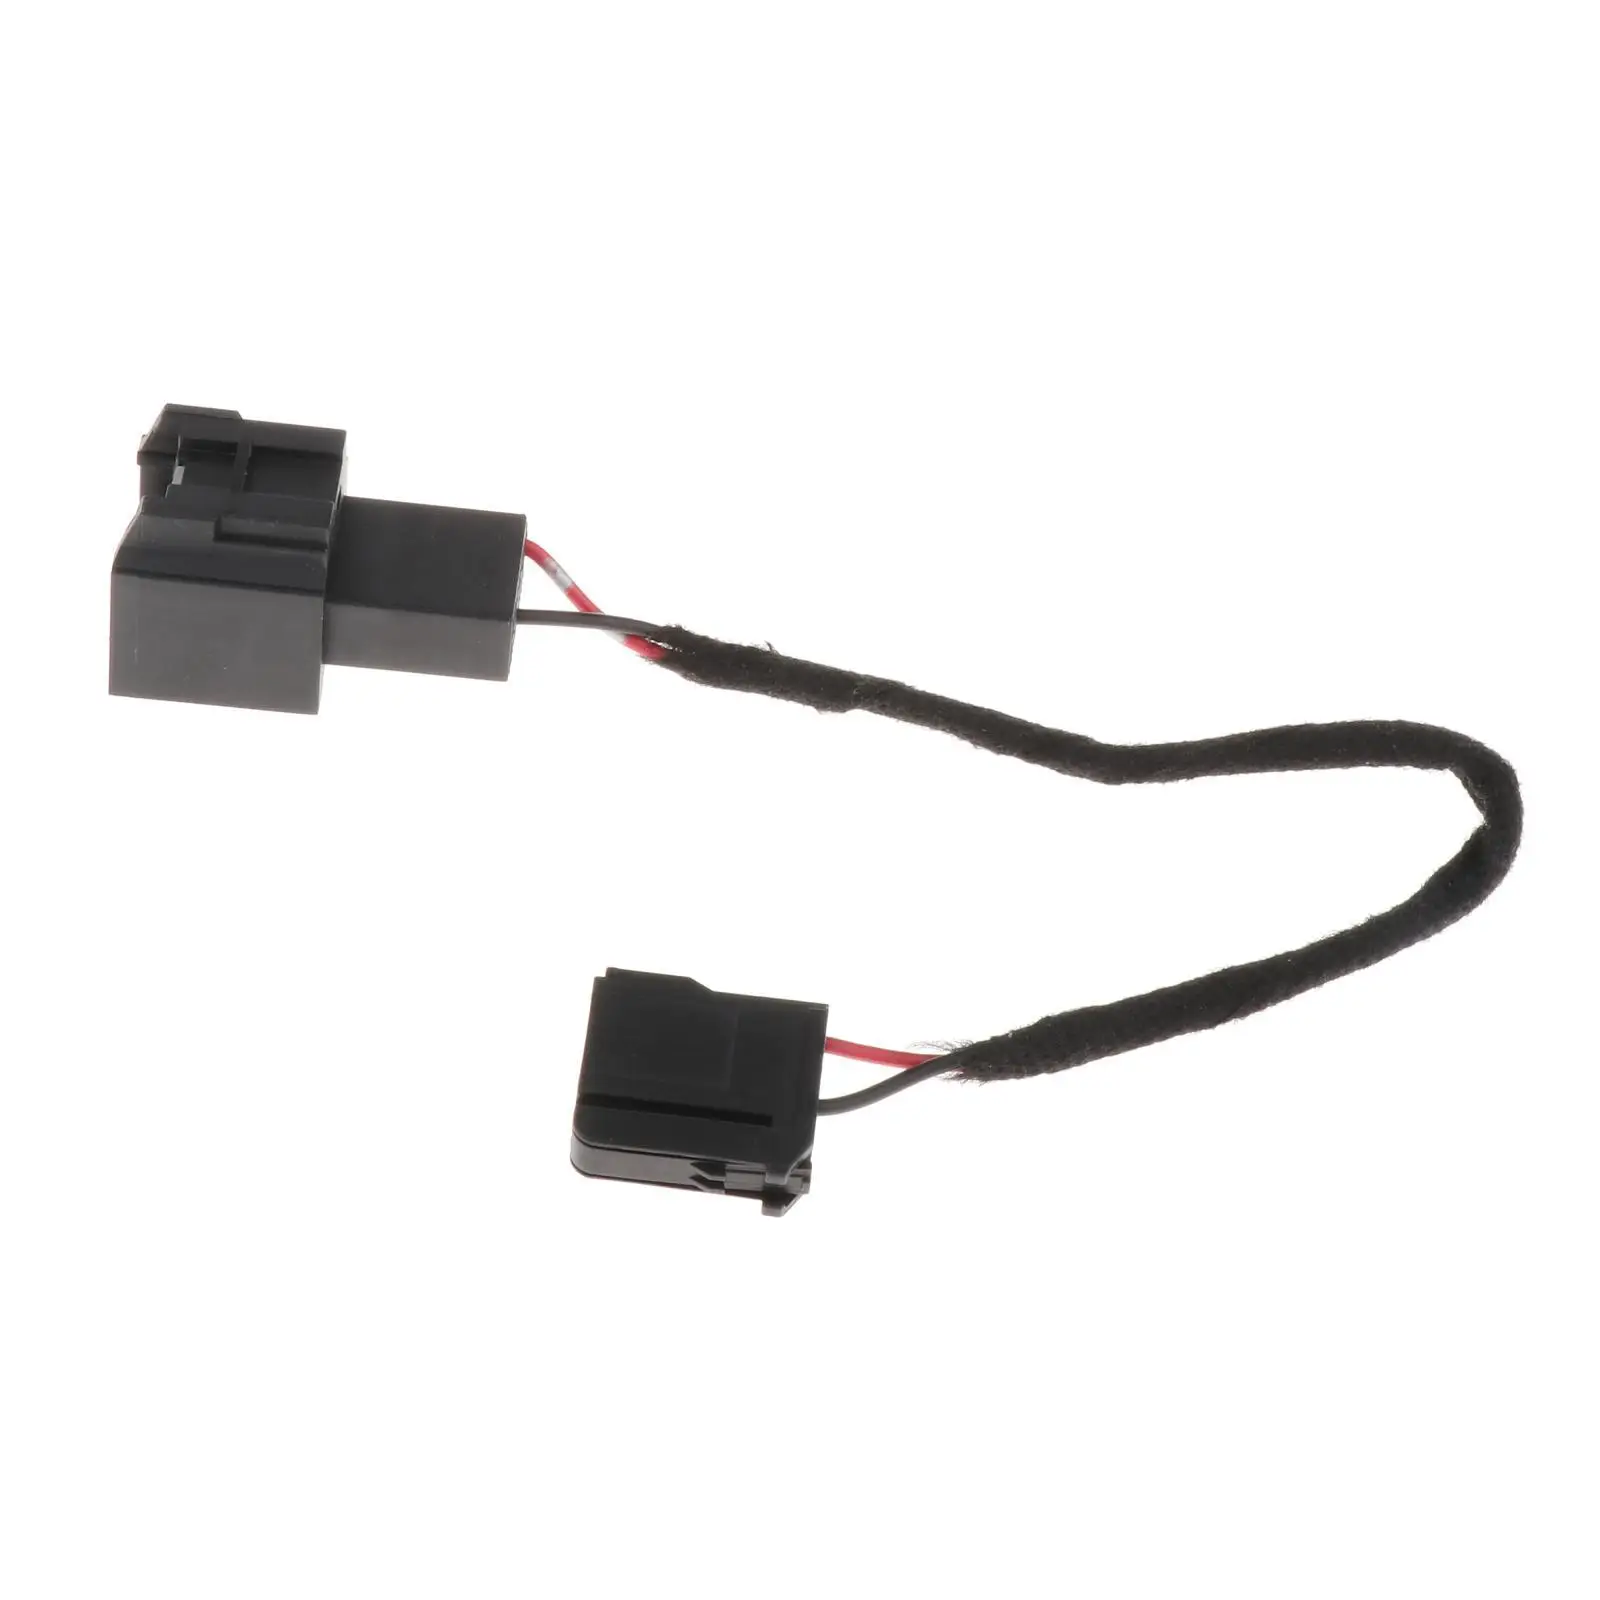 Durable Harness Wiring Adapter GEN 1 for Ford SYNC 2 To SYNC 3 Retrofit USB Media HUB, Automotive Car Accessories